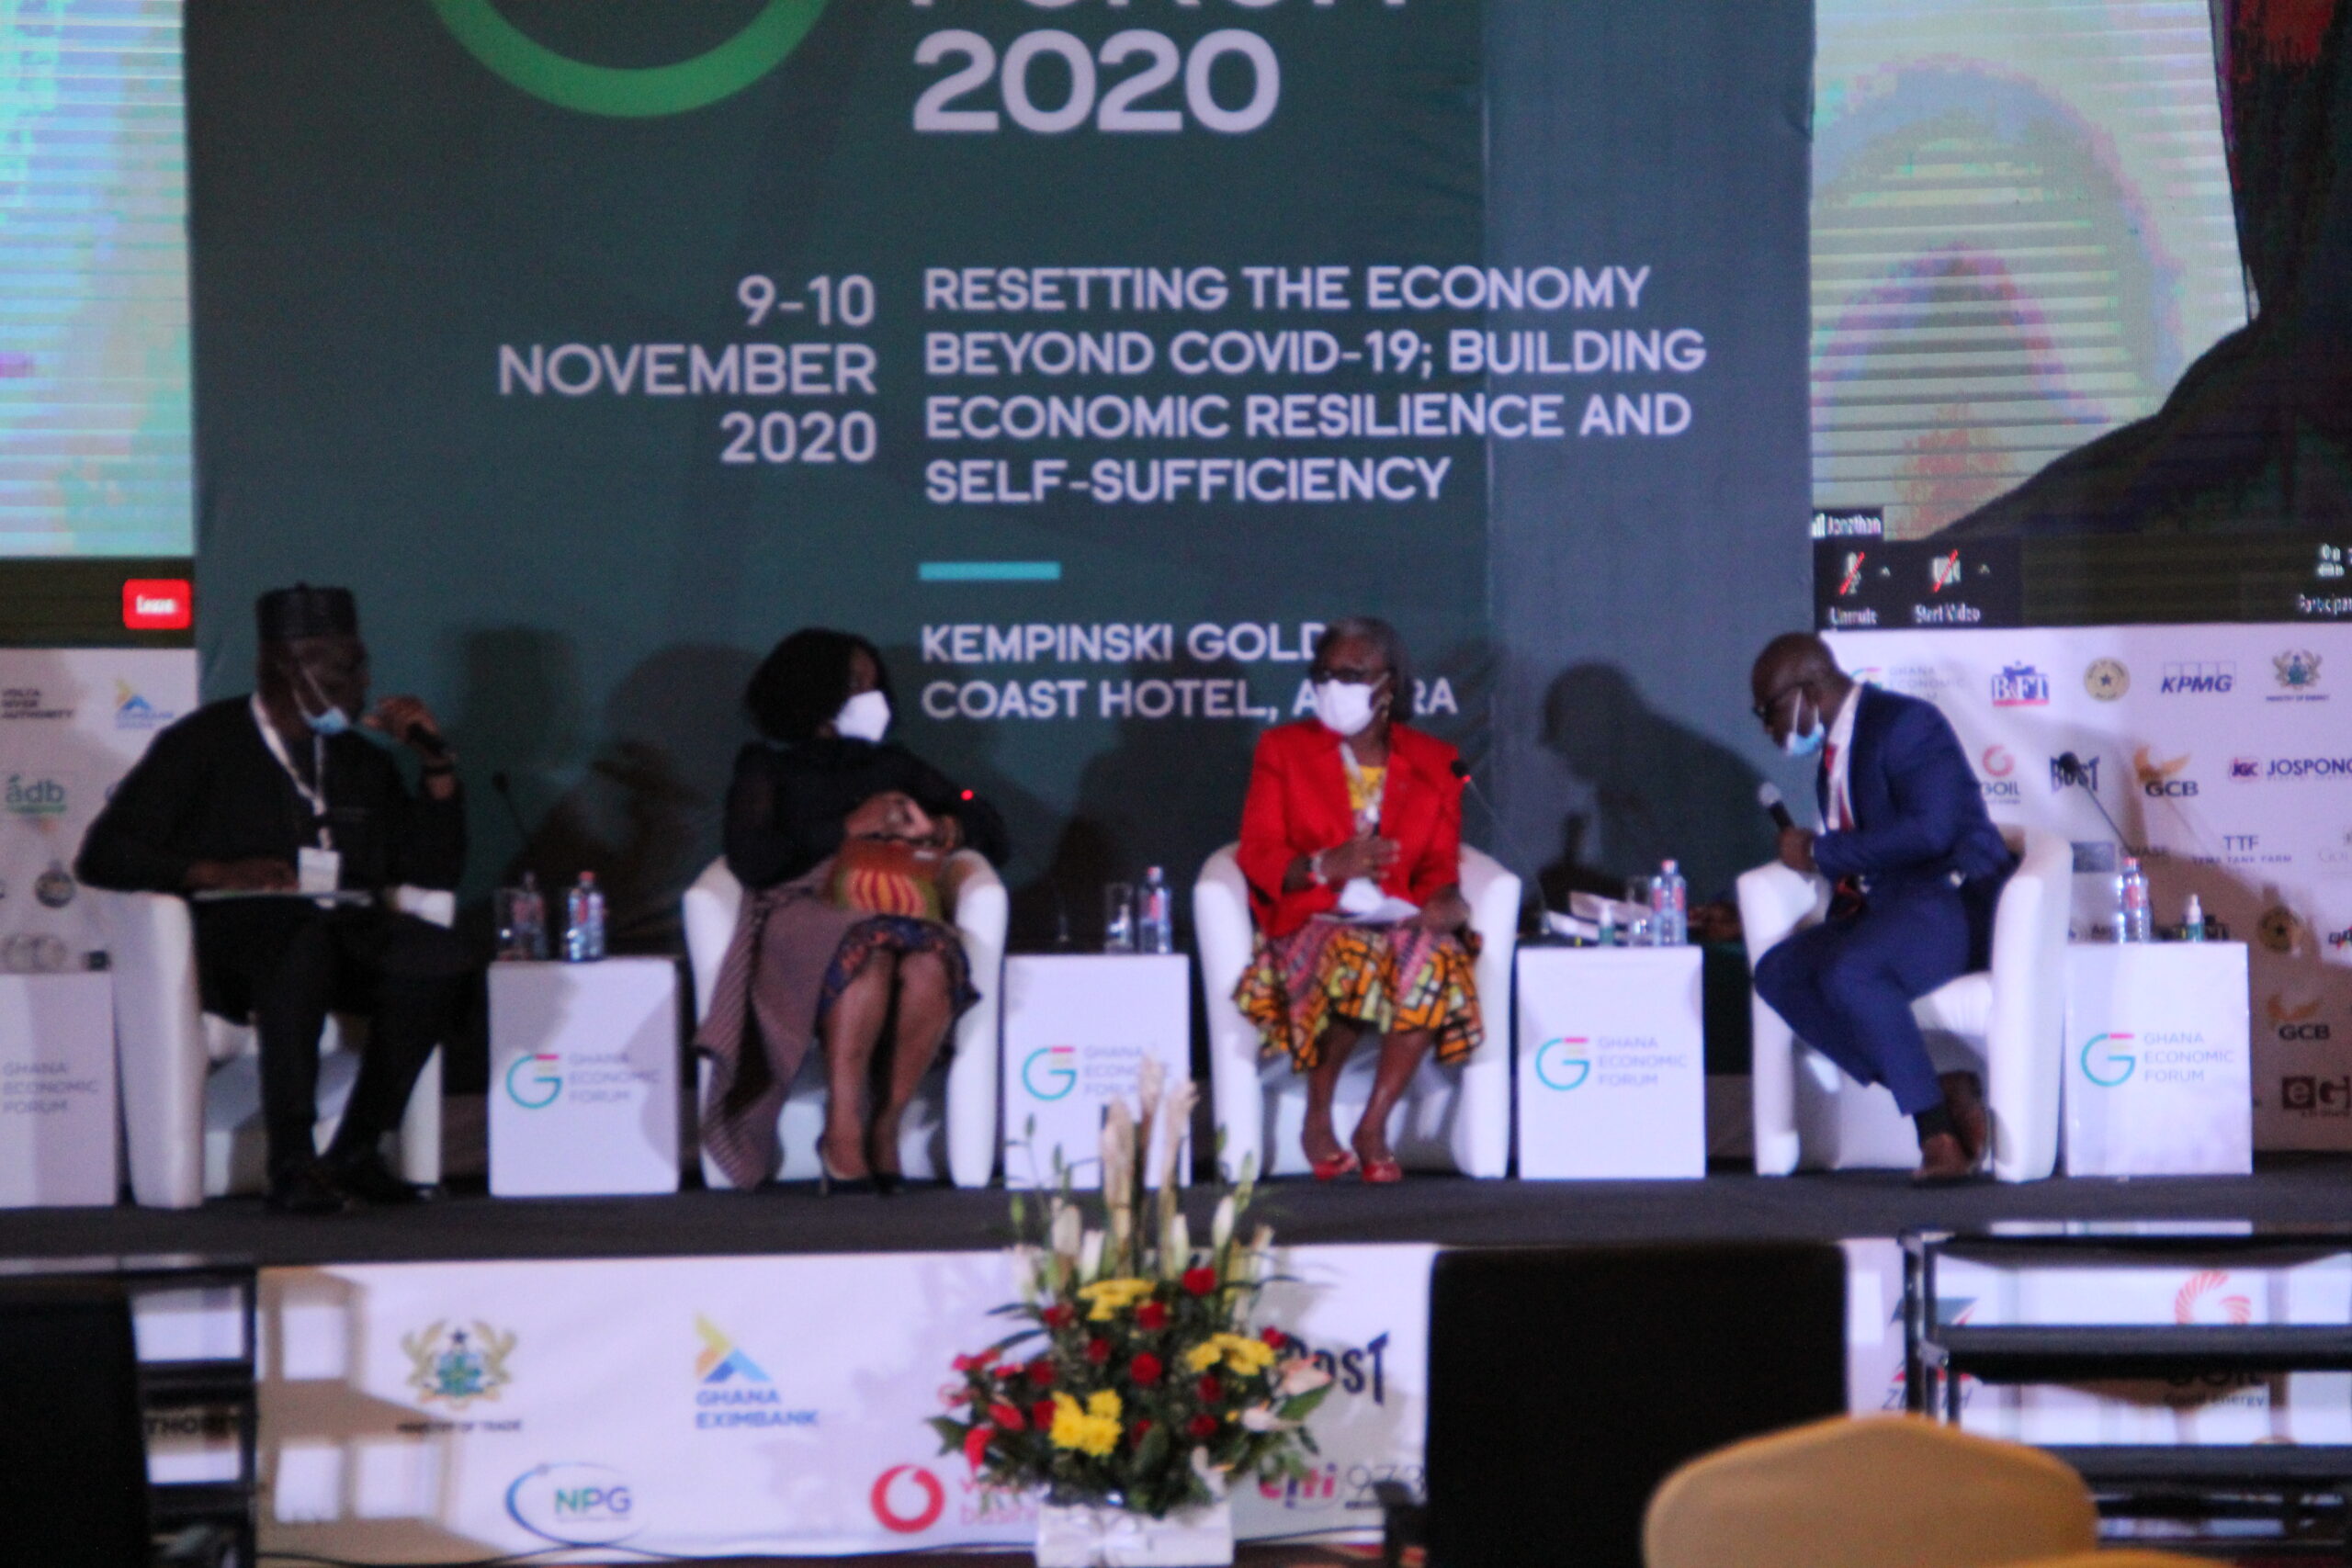 2020 Ghana Economic Forum in Pictures - The Business & Financial Times